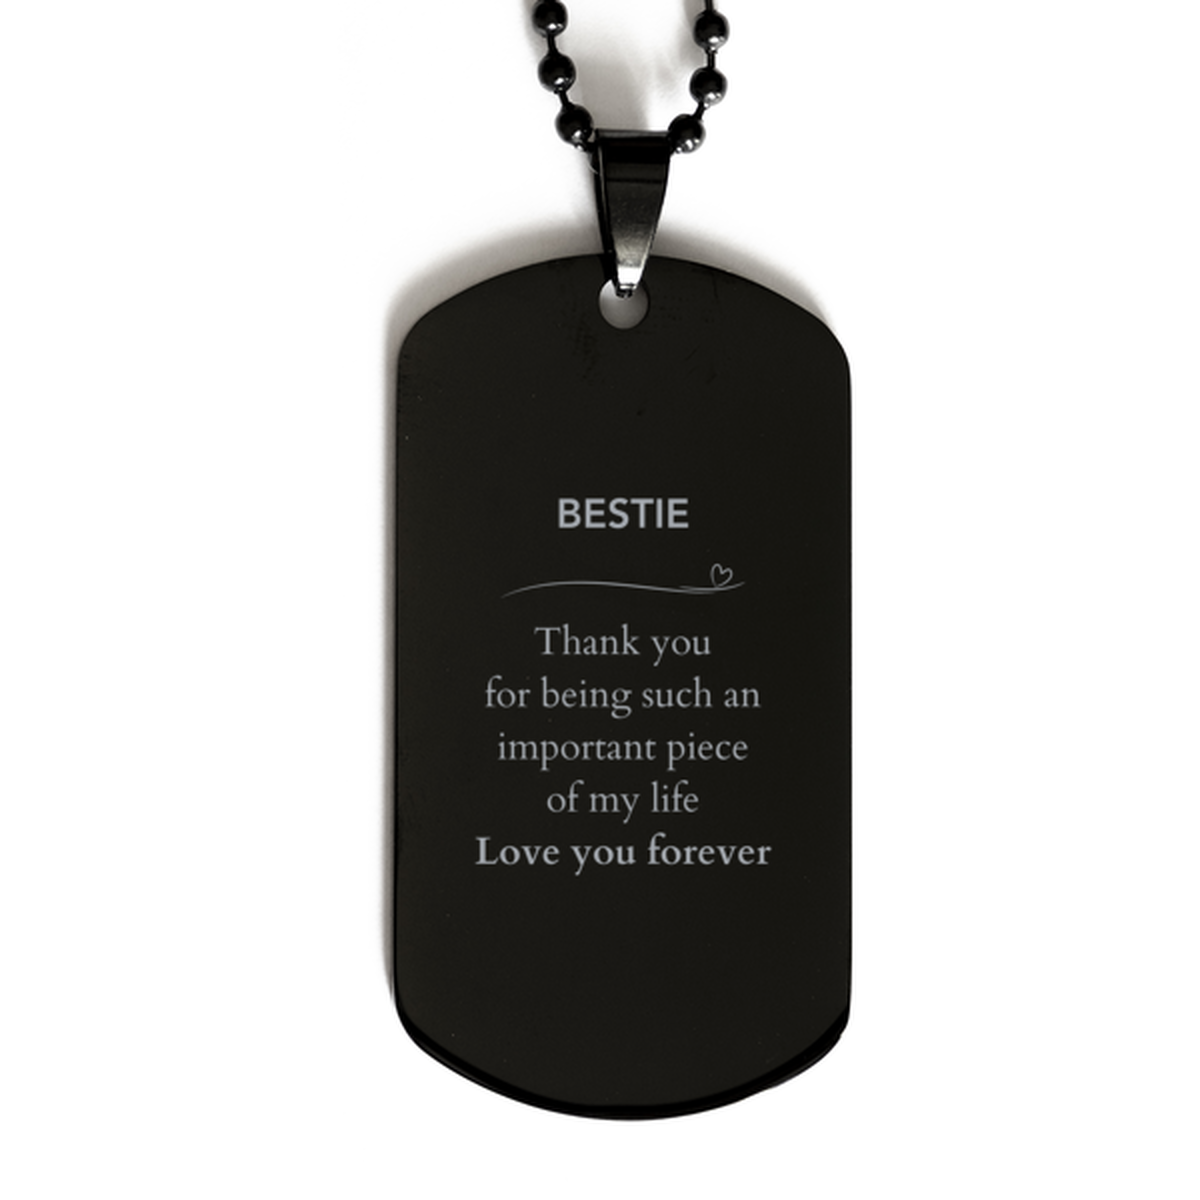 Appropriate Bestie Black Dog Tag Epic Birthday Gifts for Bestie Thank you for being such an important piece of my life Bestie Christmas Mothers Fathers Day